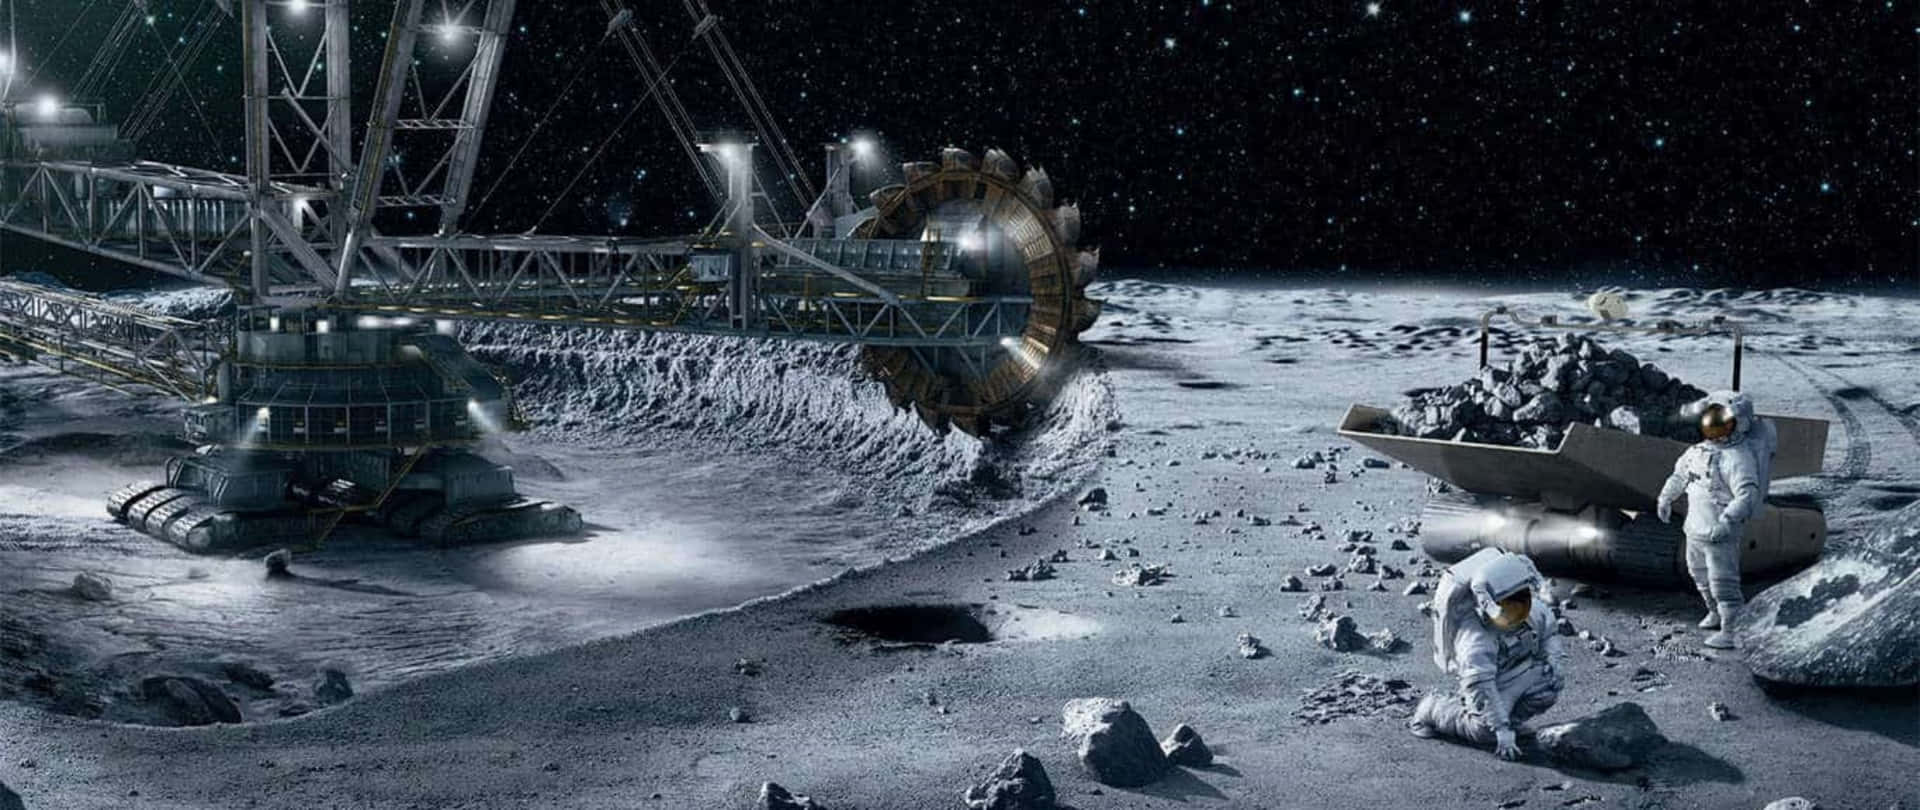 Excavator in Space: Unearthing the Future of Mining Wallpaper